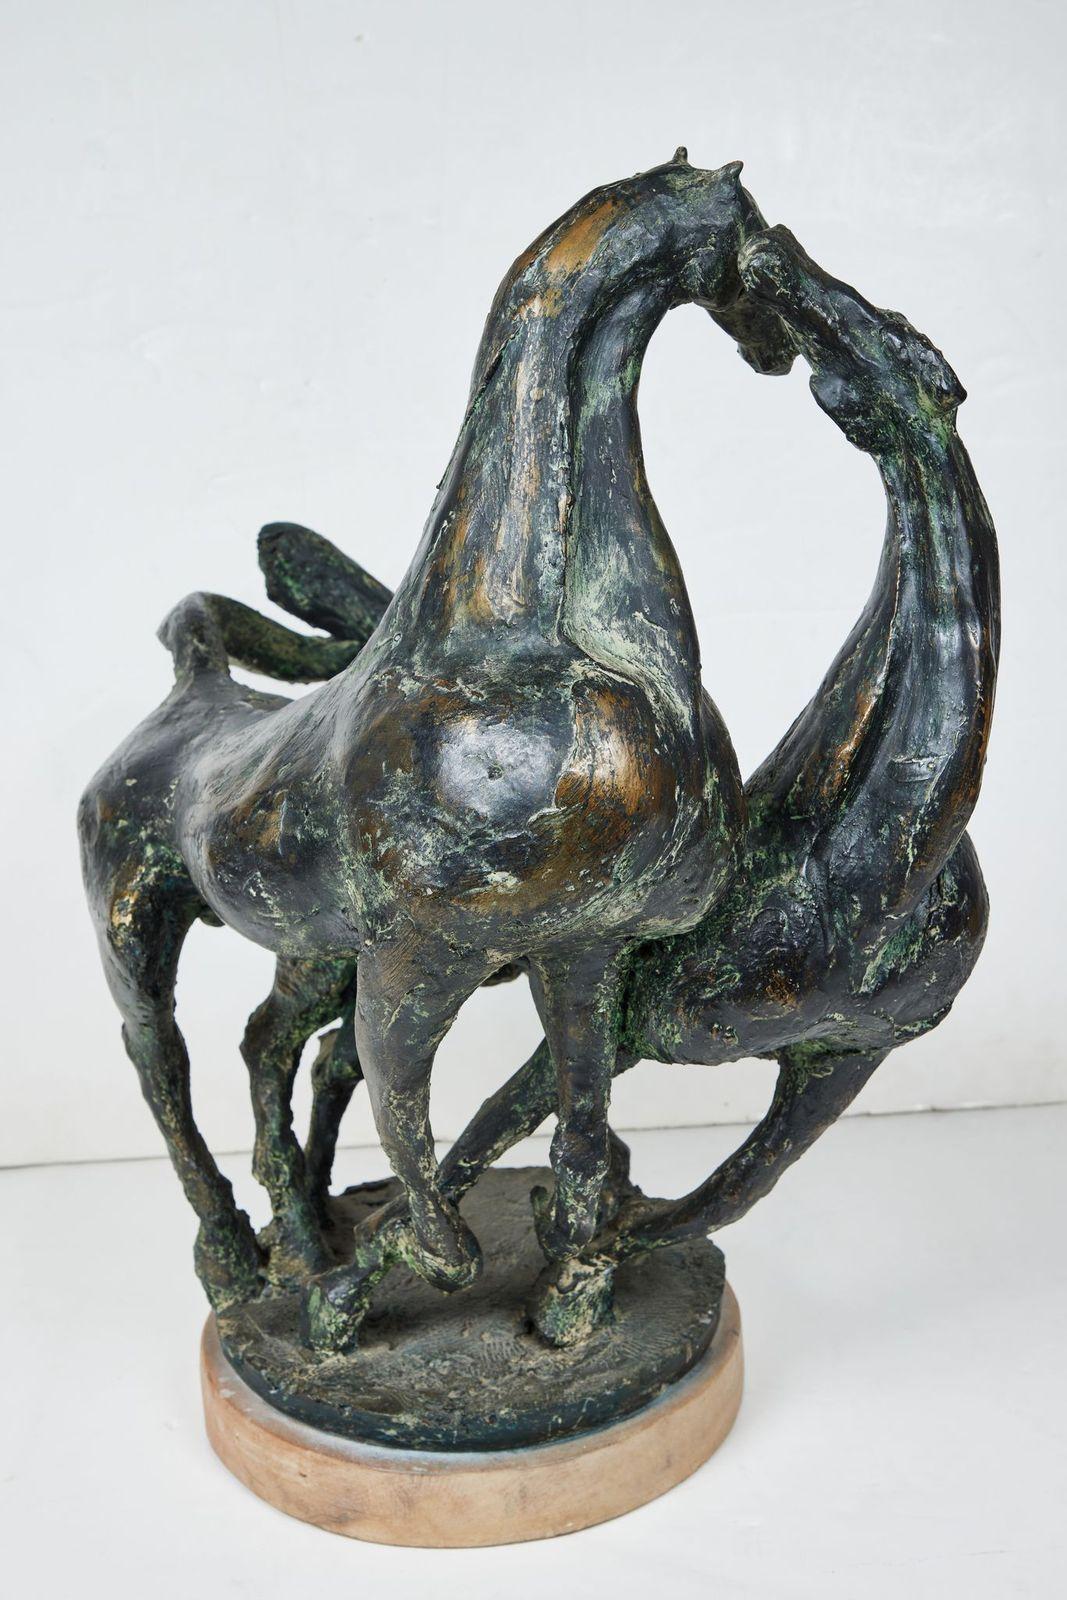 An initialed, vigorously modeled, patinated resin sculpture of two stallions at play signed (see image 5) by listed, Italian artist, Marino Mazzacurati (1900-1969).

Mazzacurati was a painter and sculptor who worked in Cubism, Expressionism and